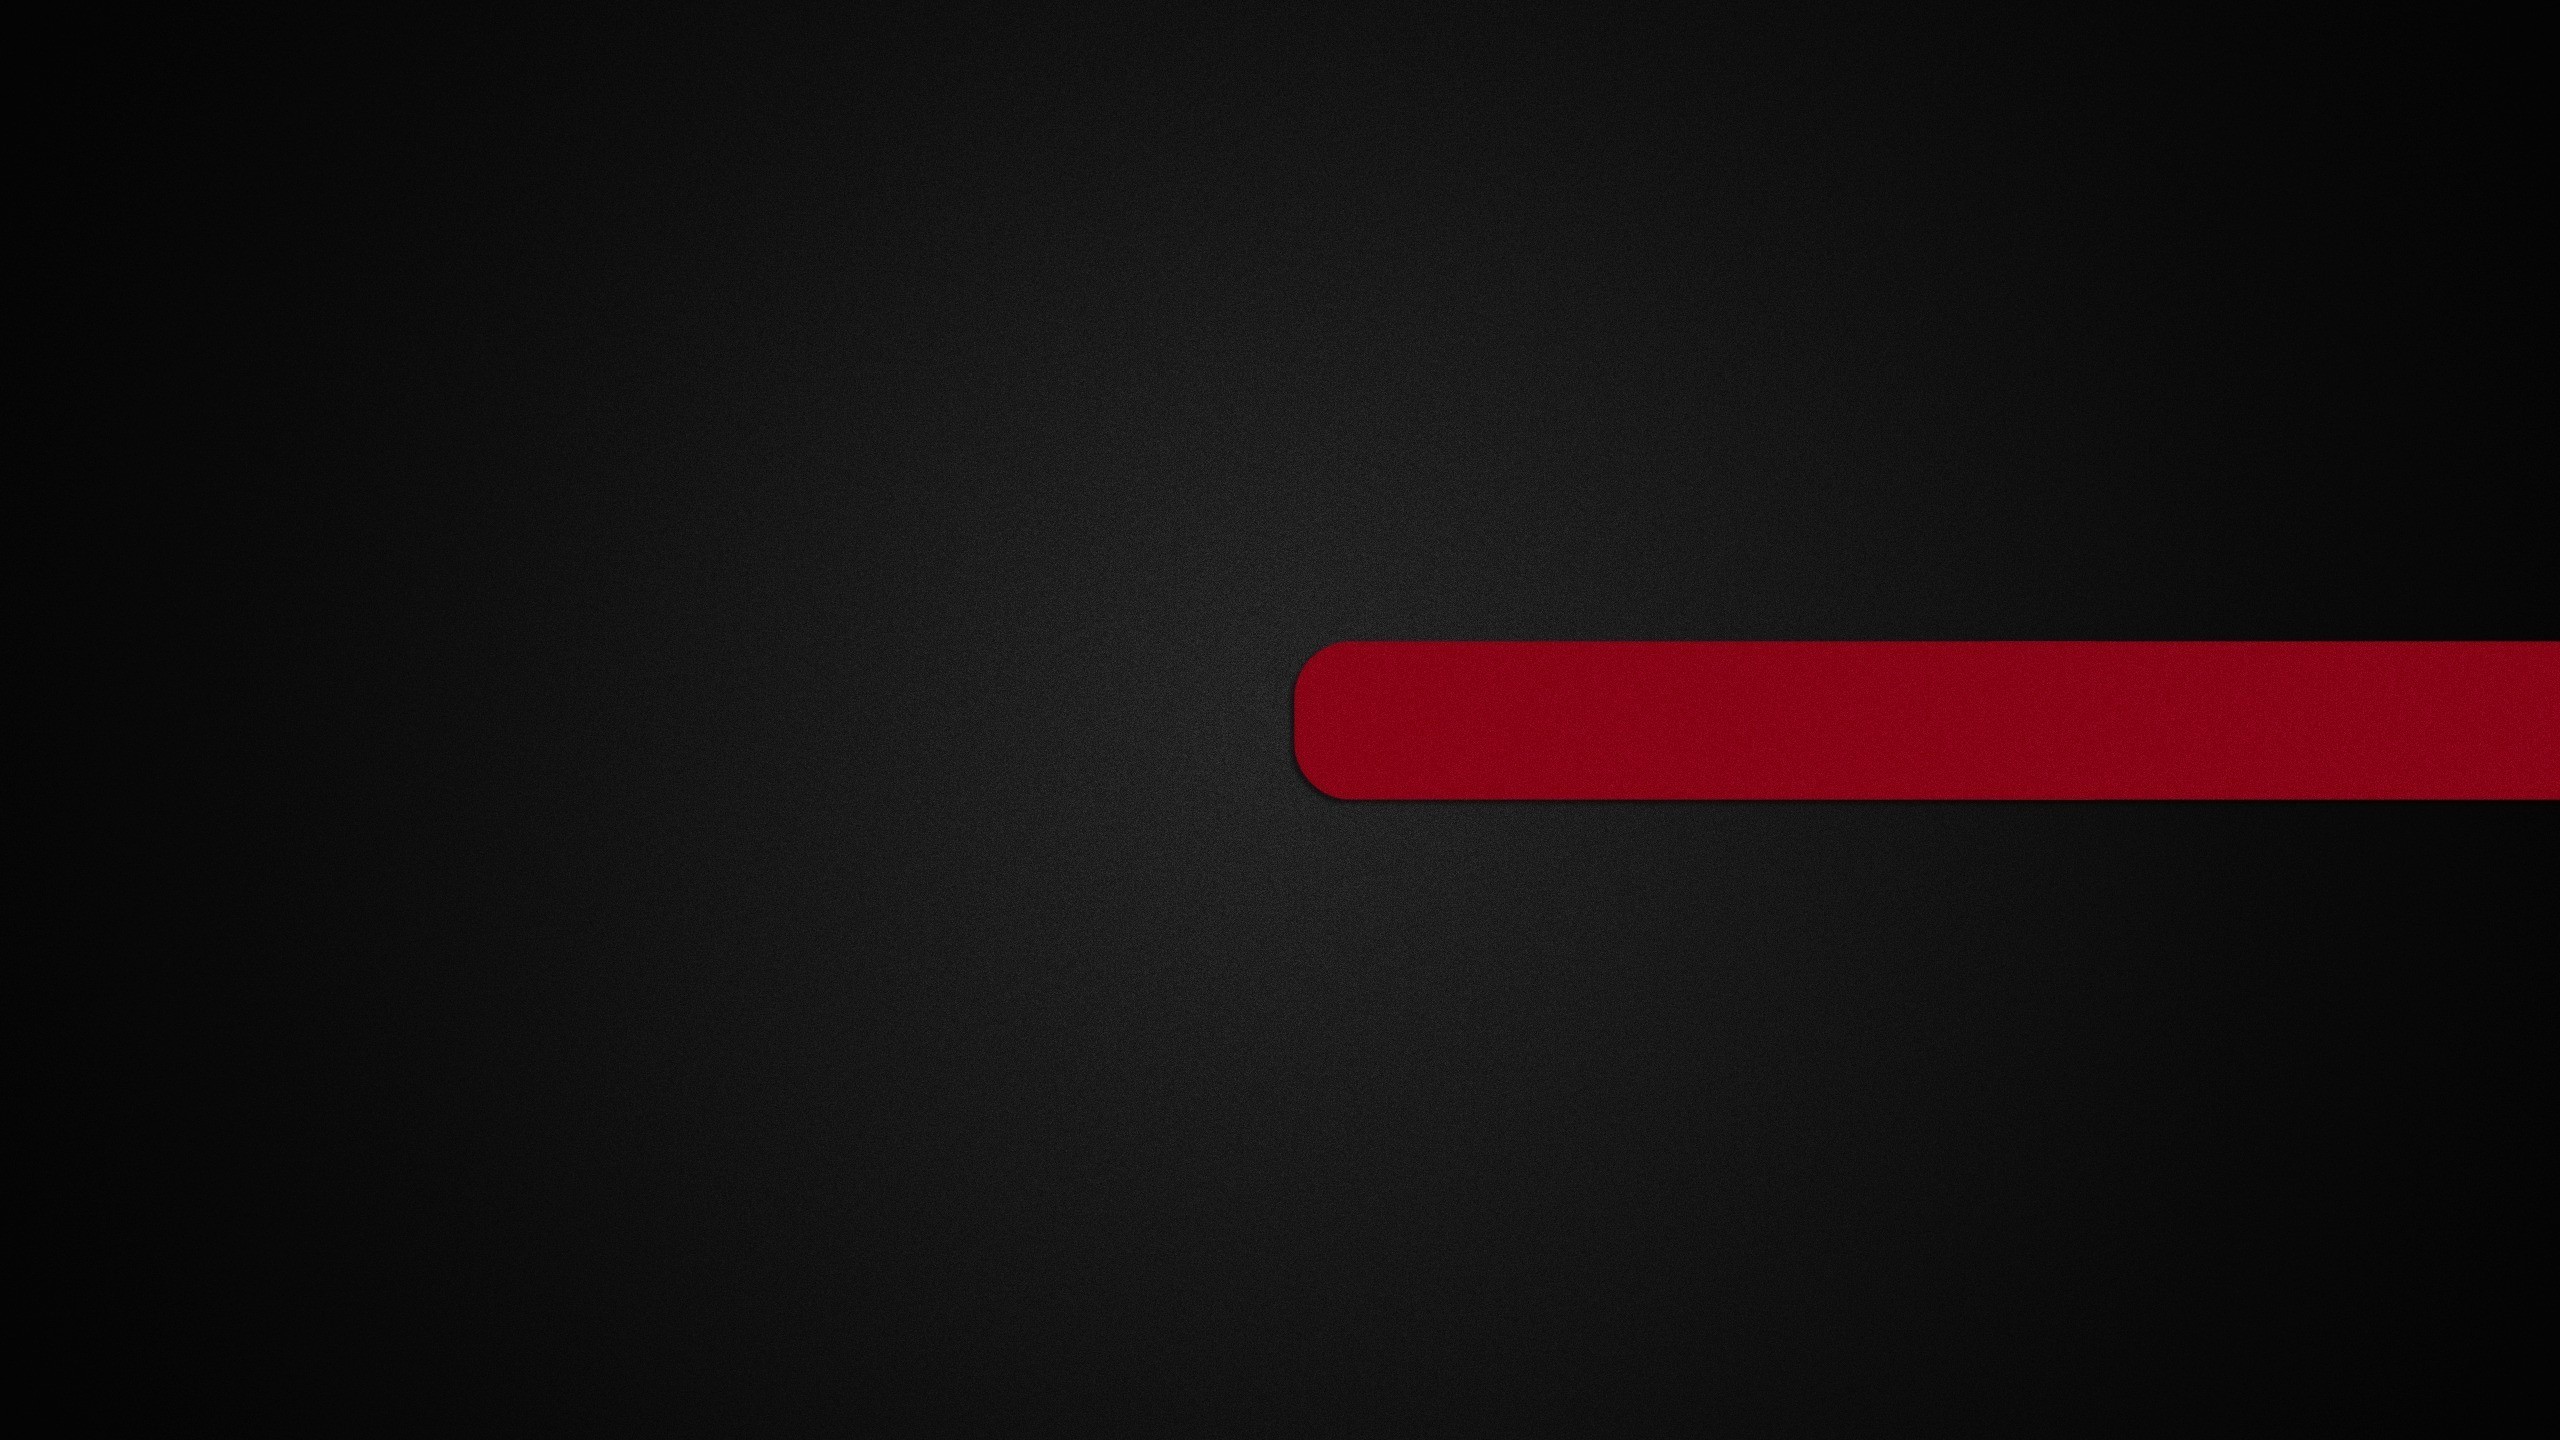 The Post Black Abstract Wallpaper HD Appeared First On